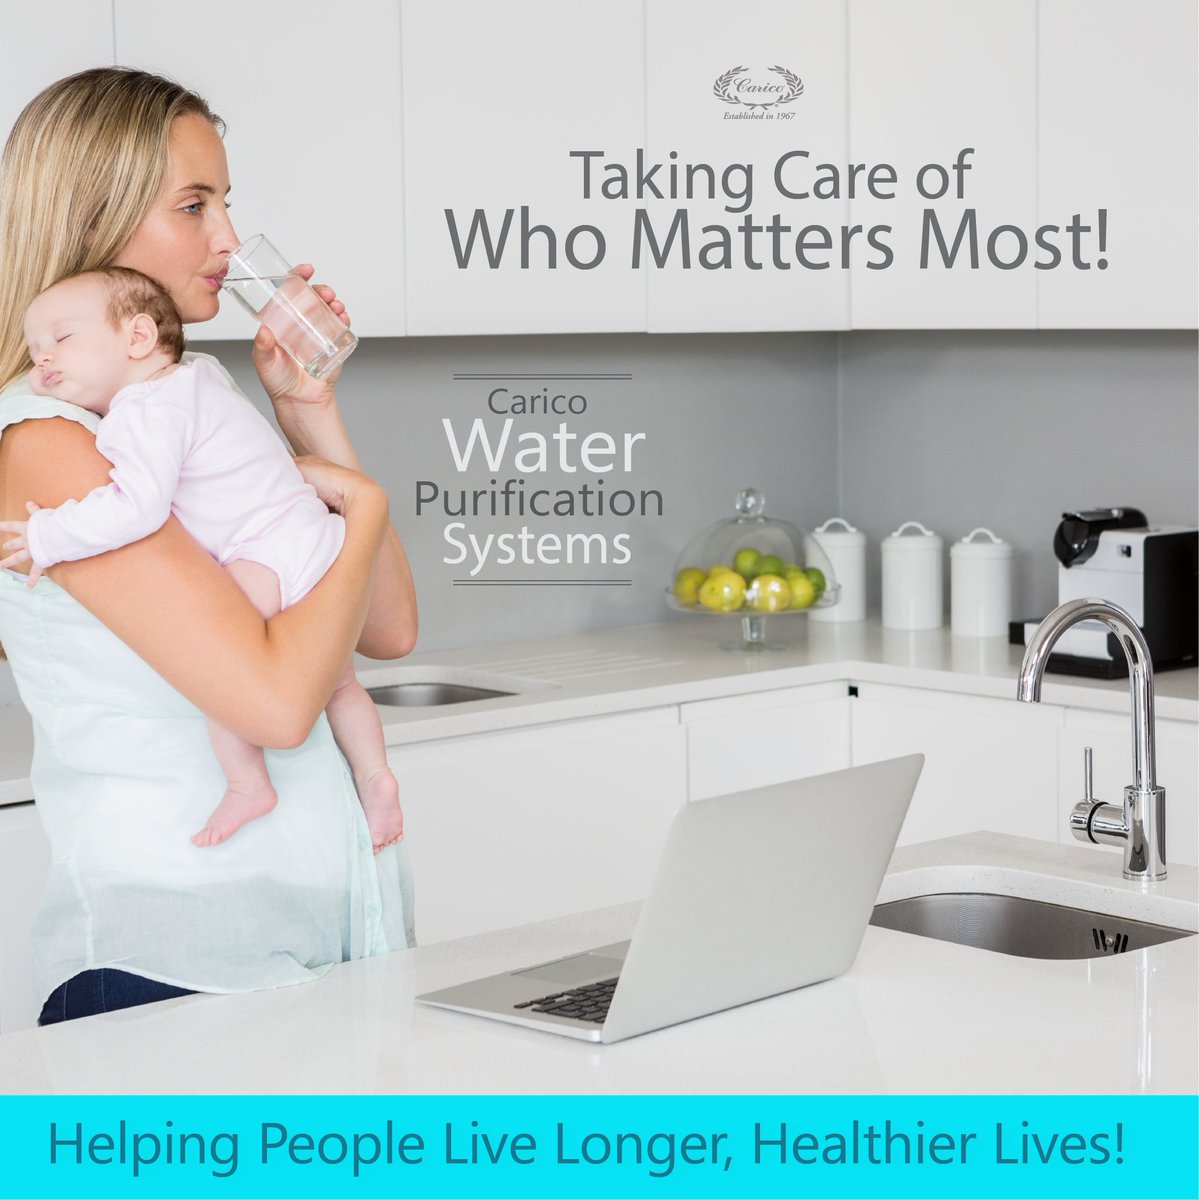 💧 Taking care of who matters most! 💧 With Carico Water Purification Systems, ensure your loved ones enjoy clean, safe water daily 💙Say goodbye to impurities and hello to peace of mind. #Carico #WaterPurification #FamilyFirst' #Caricowater #WaterPurification #HealthyLiving